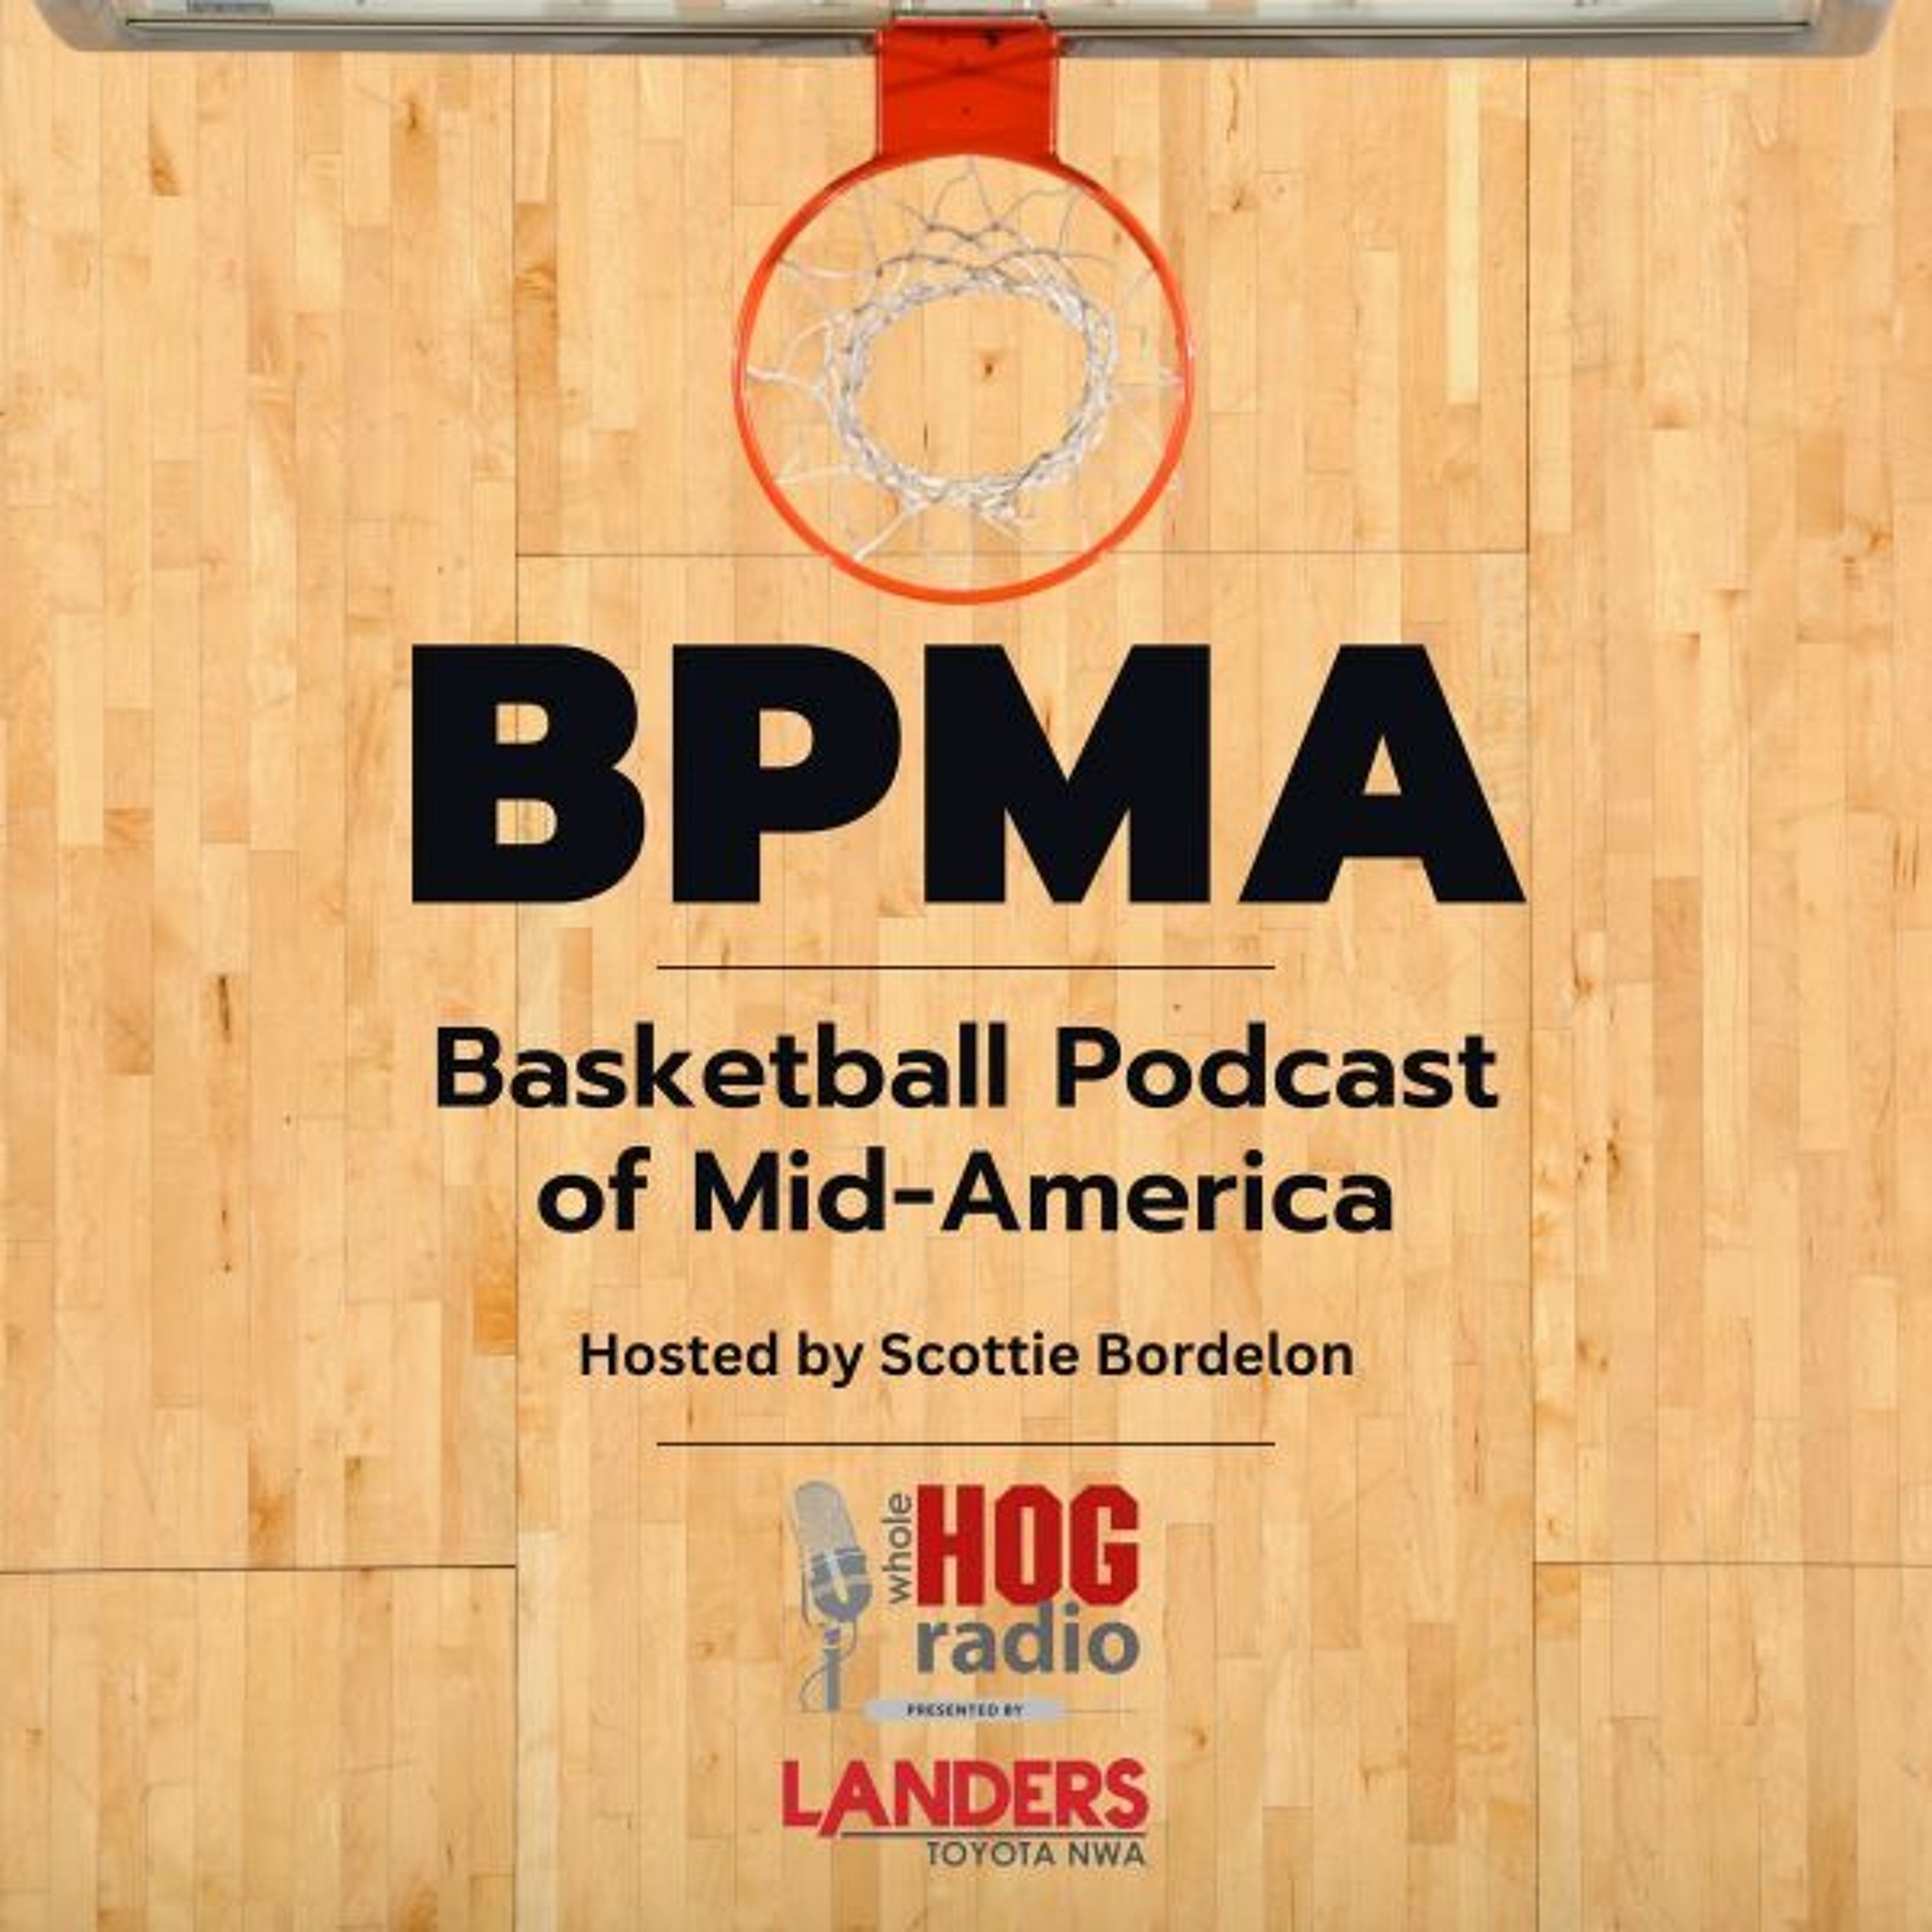 Basketball Podcast of Mid-America: Arkansas adds another transfer, Walsh enters NBA Draft